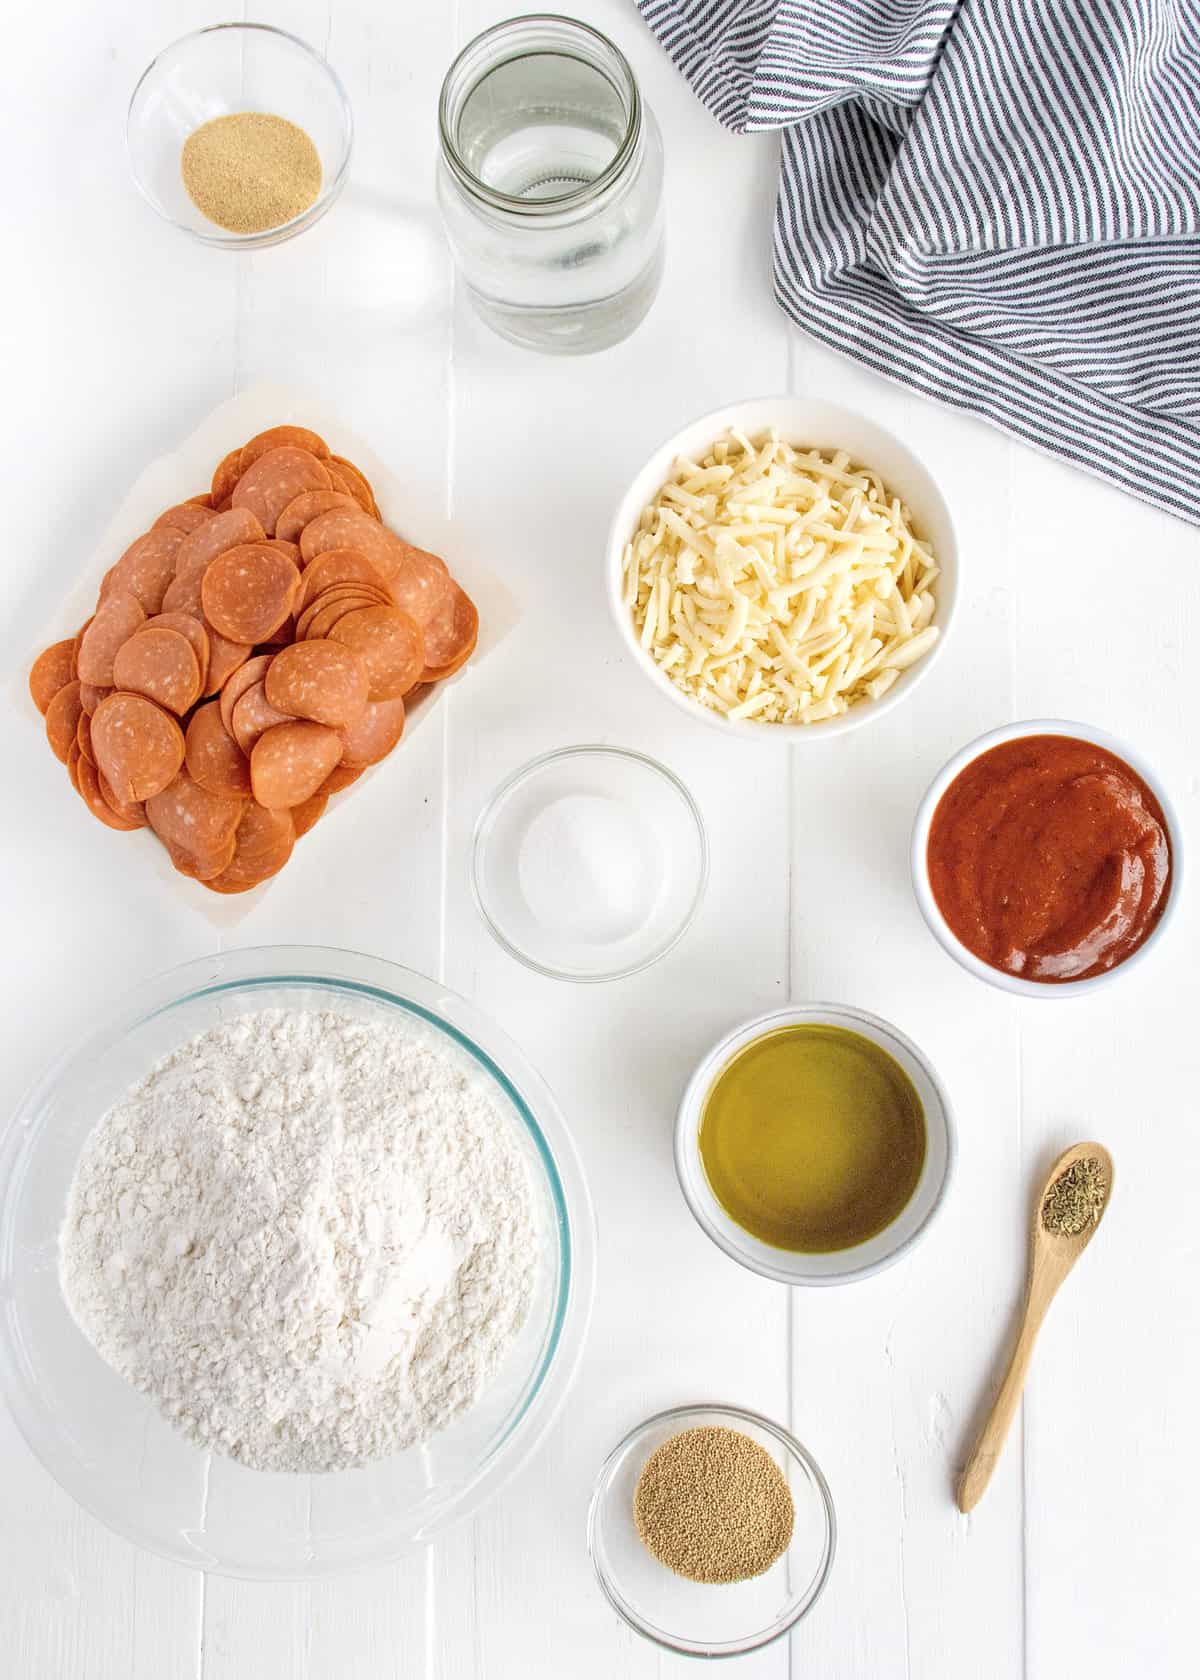 Ingredients to make a sheet pan pizza arranged on a counter.